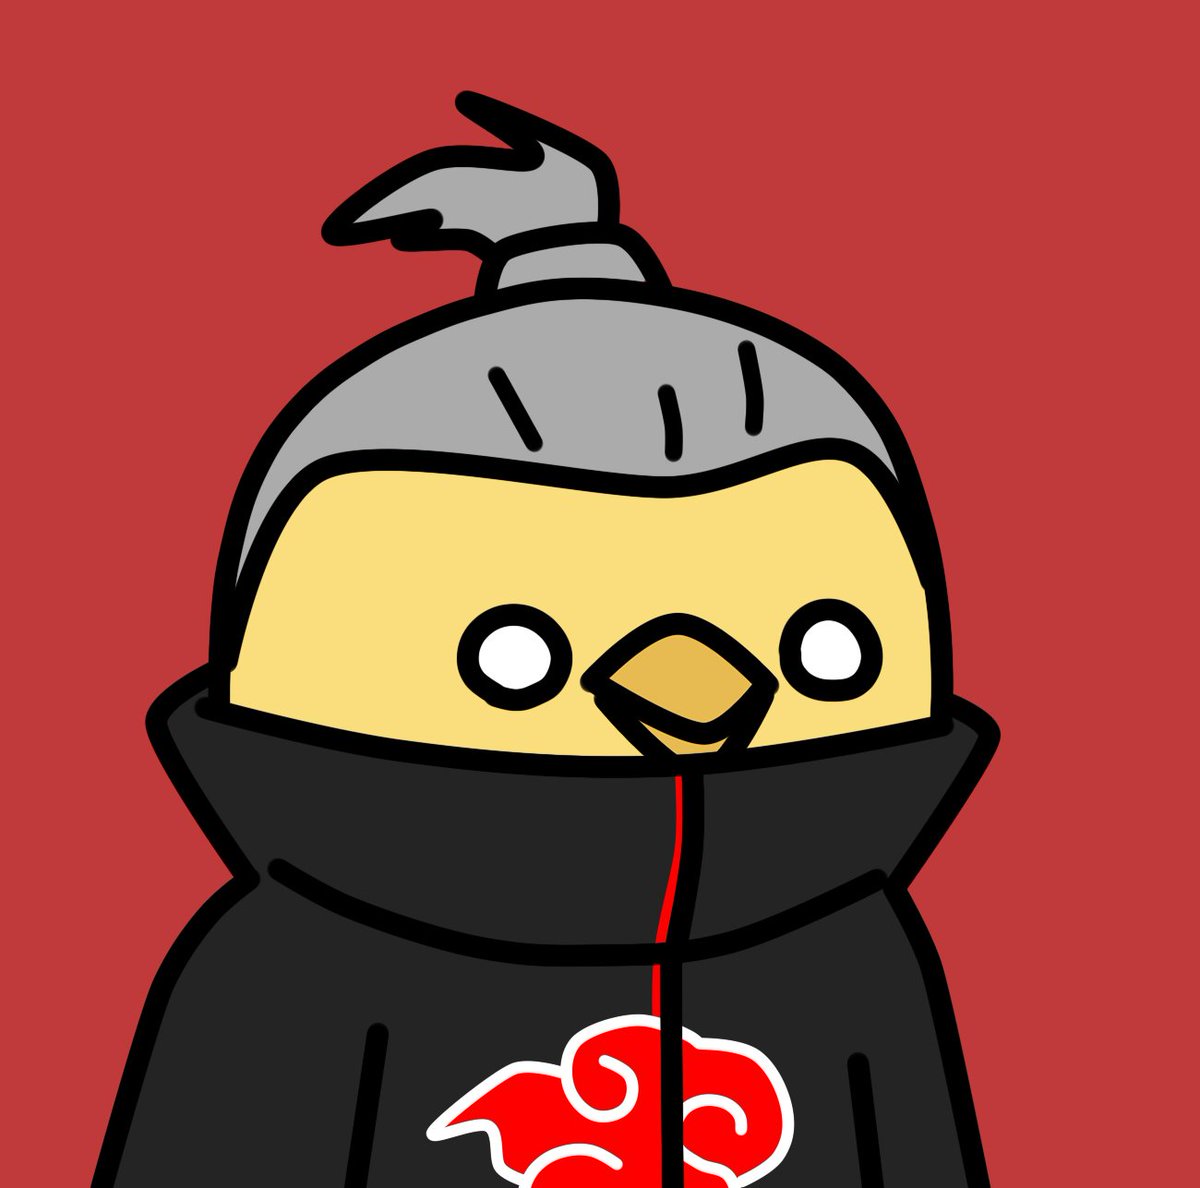 1 left, primary still available.
and Raffle Akatsuki is ready to be drawn.

secondary purchases also get 1 raffle ticket.
So let's take it #CanaryPunk now!
opensea.io/collection/new…

#NFTs #NFTpolygon #VERTICALNFT #NFTRaffle